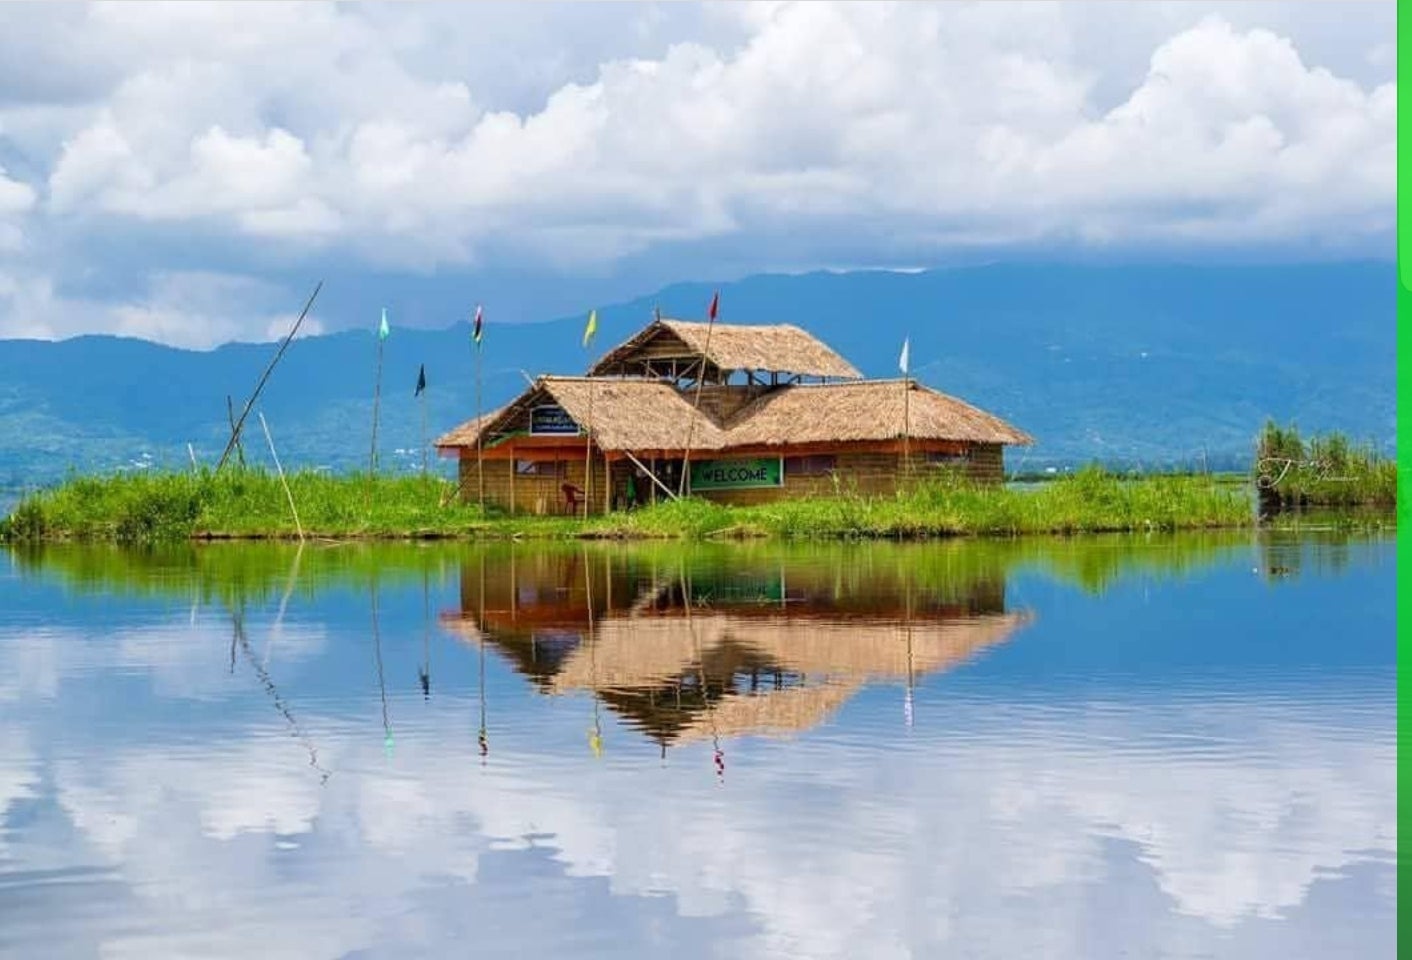 Boats gliding on the tranquil waters of Loktak Lake surrounded by green landscapes